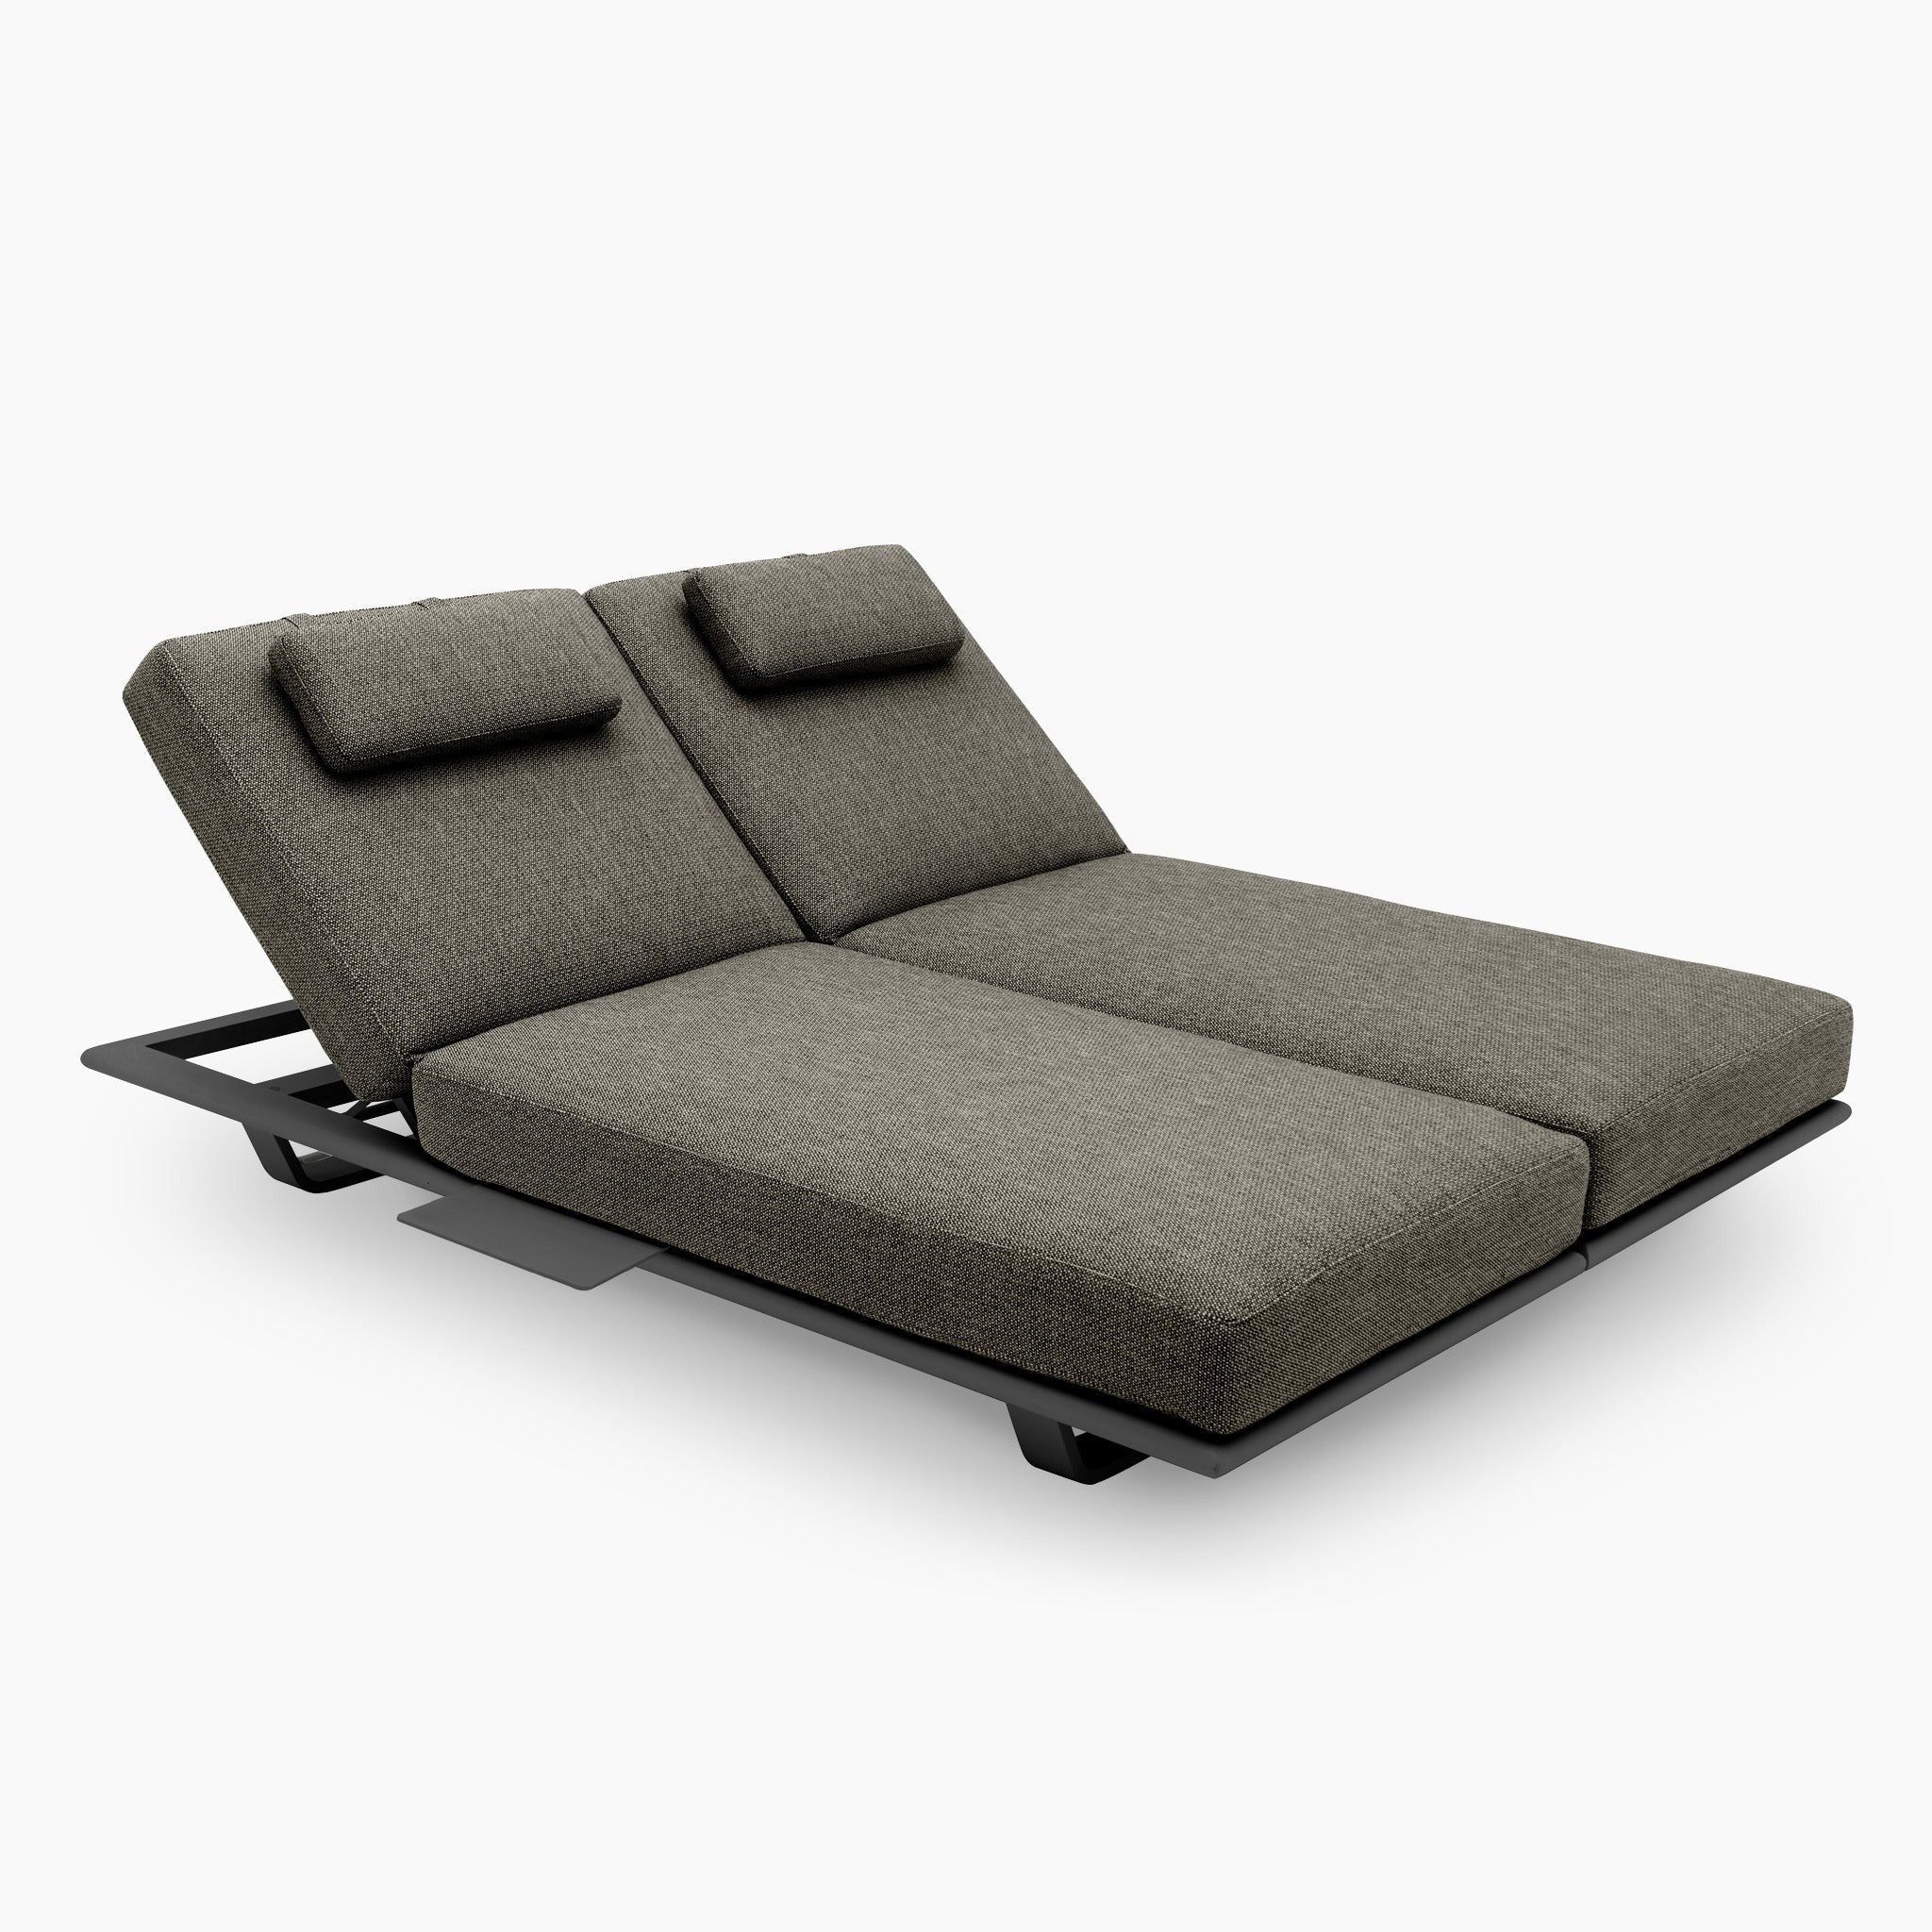 Hatia Double Sun Lounger with Side Table in Charcoal